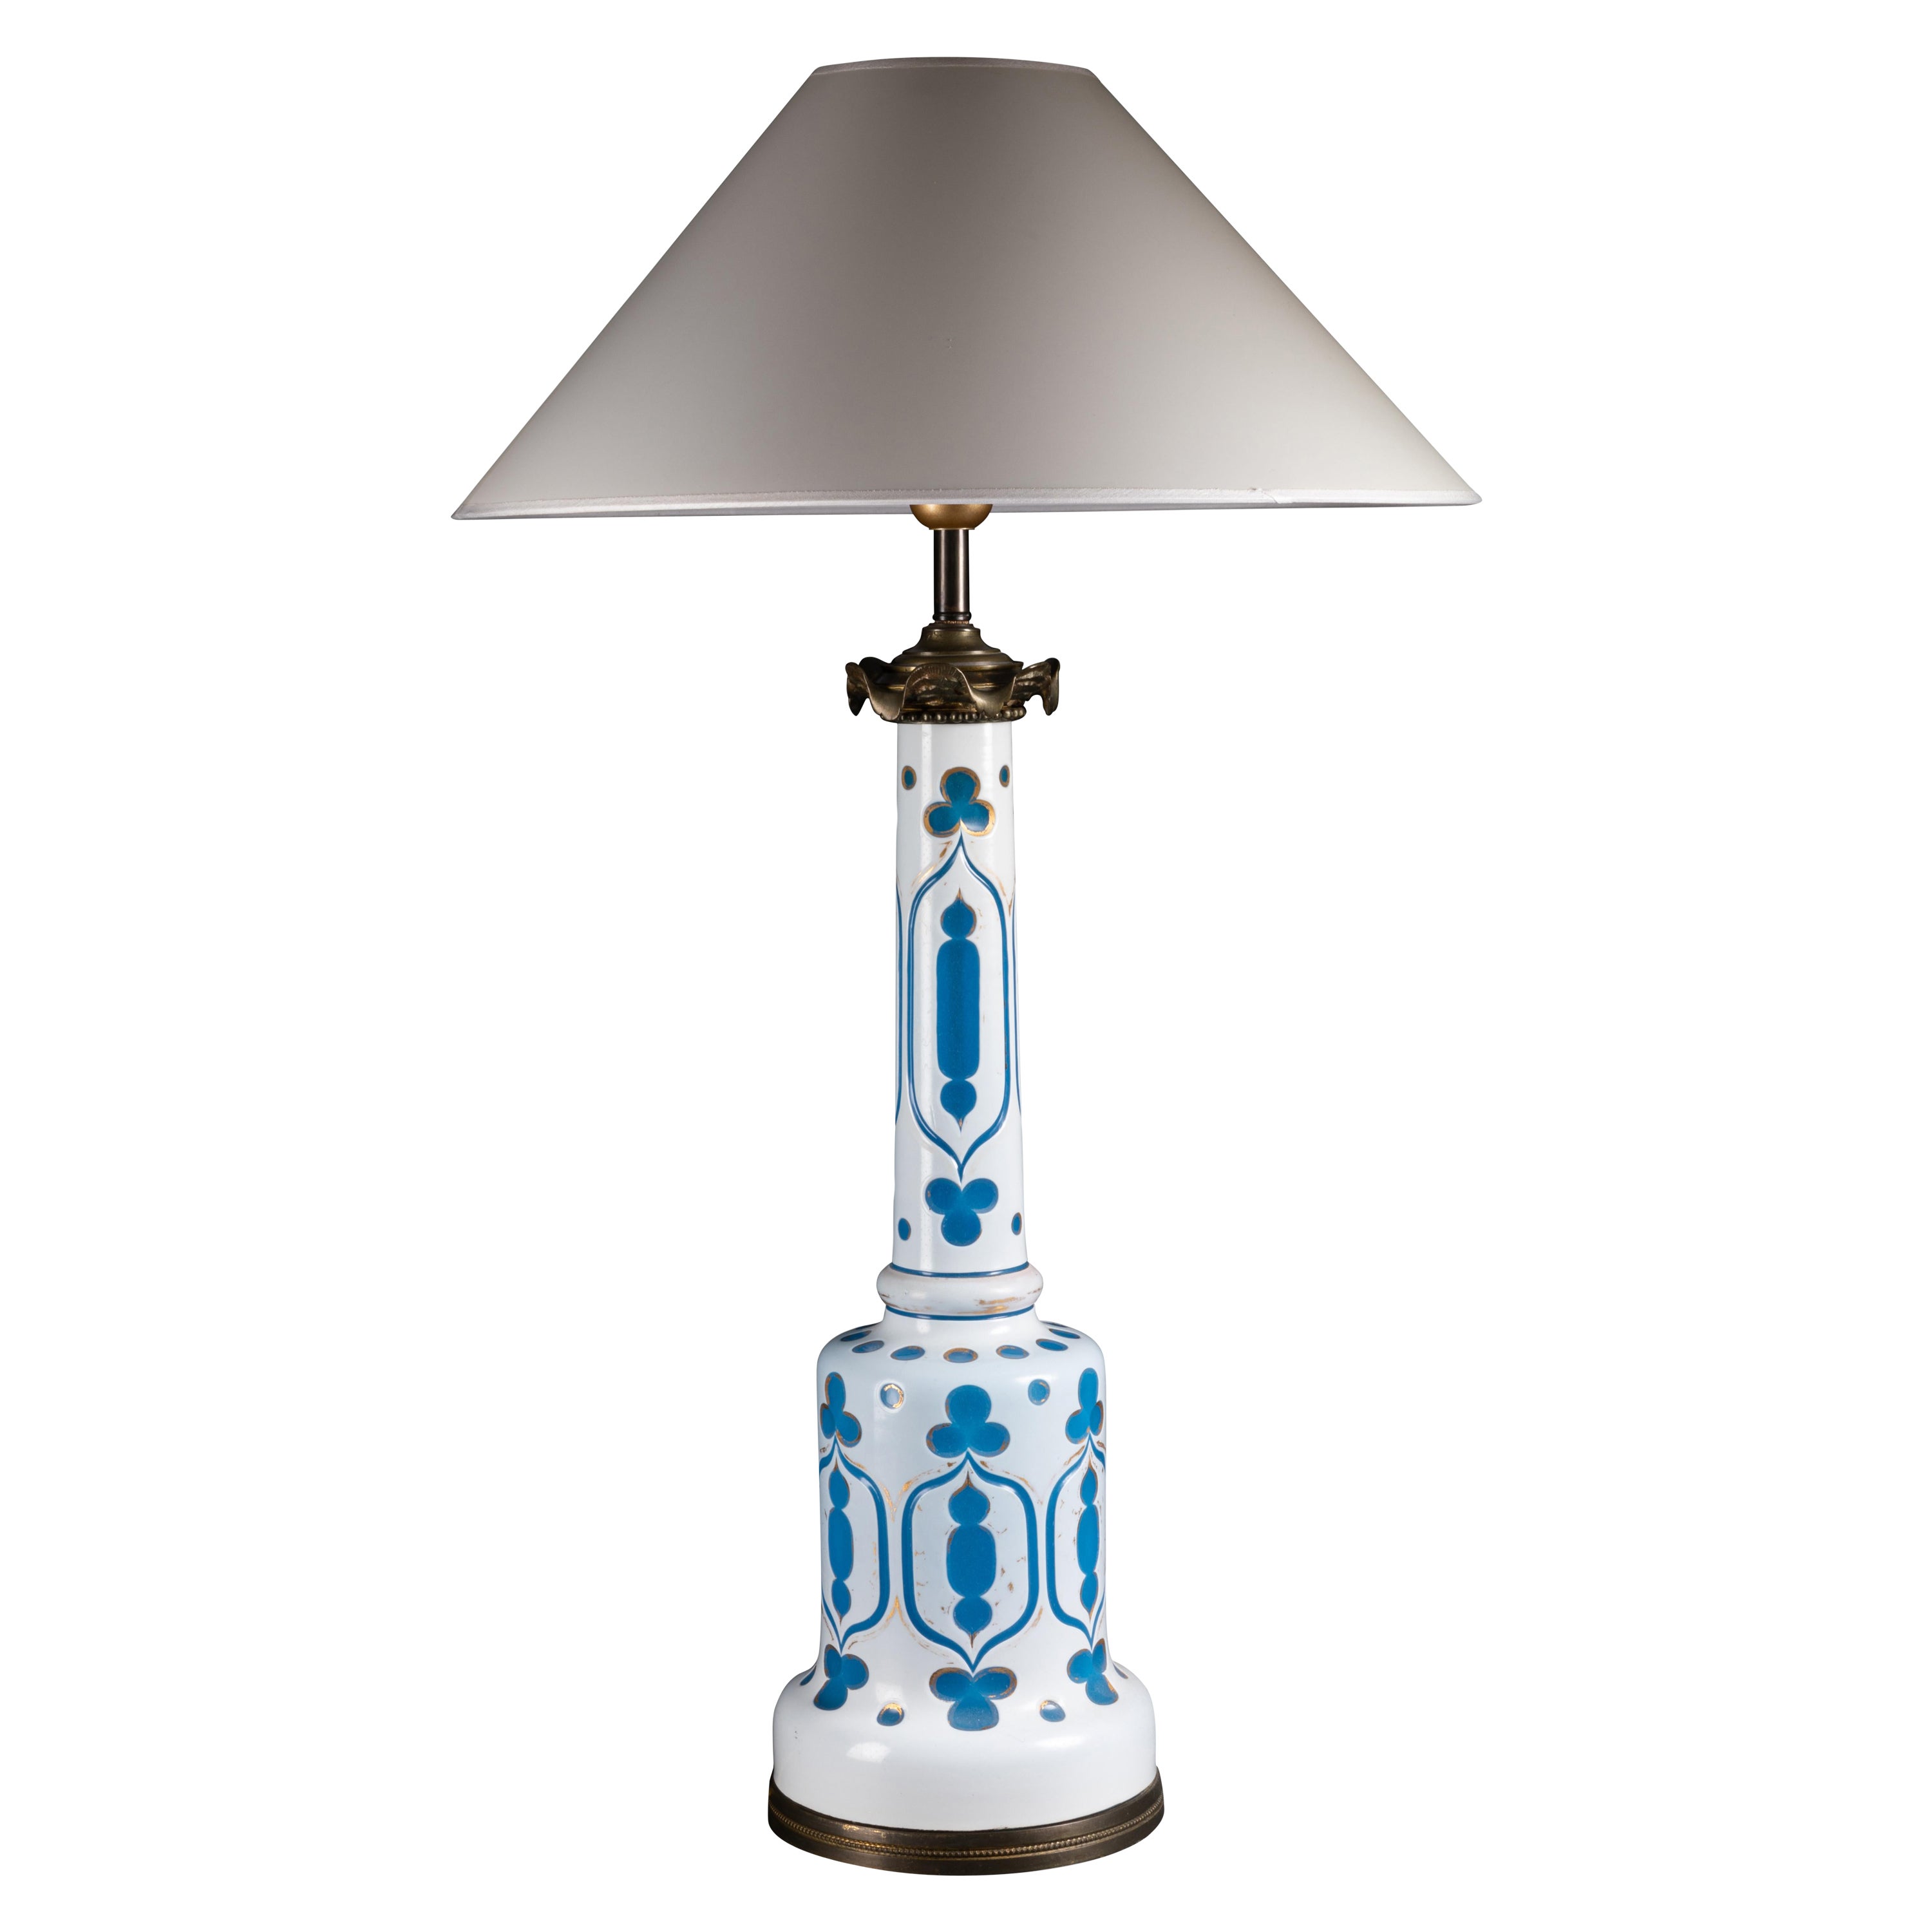 Blue and White Overlay Glass Lamp from the Iconic Store of Madeleine Castaing